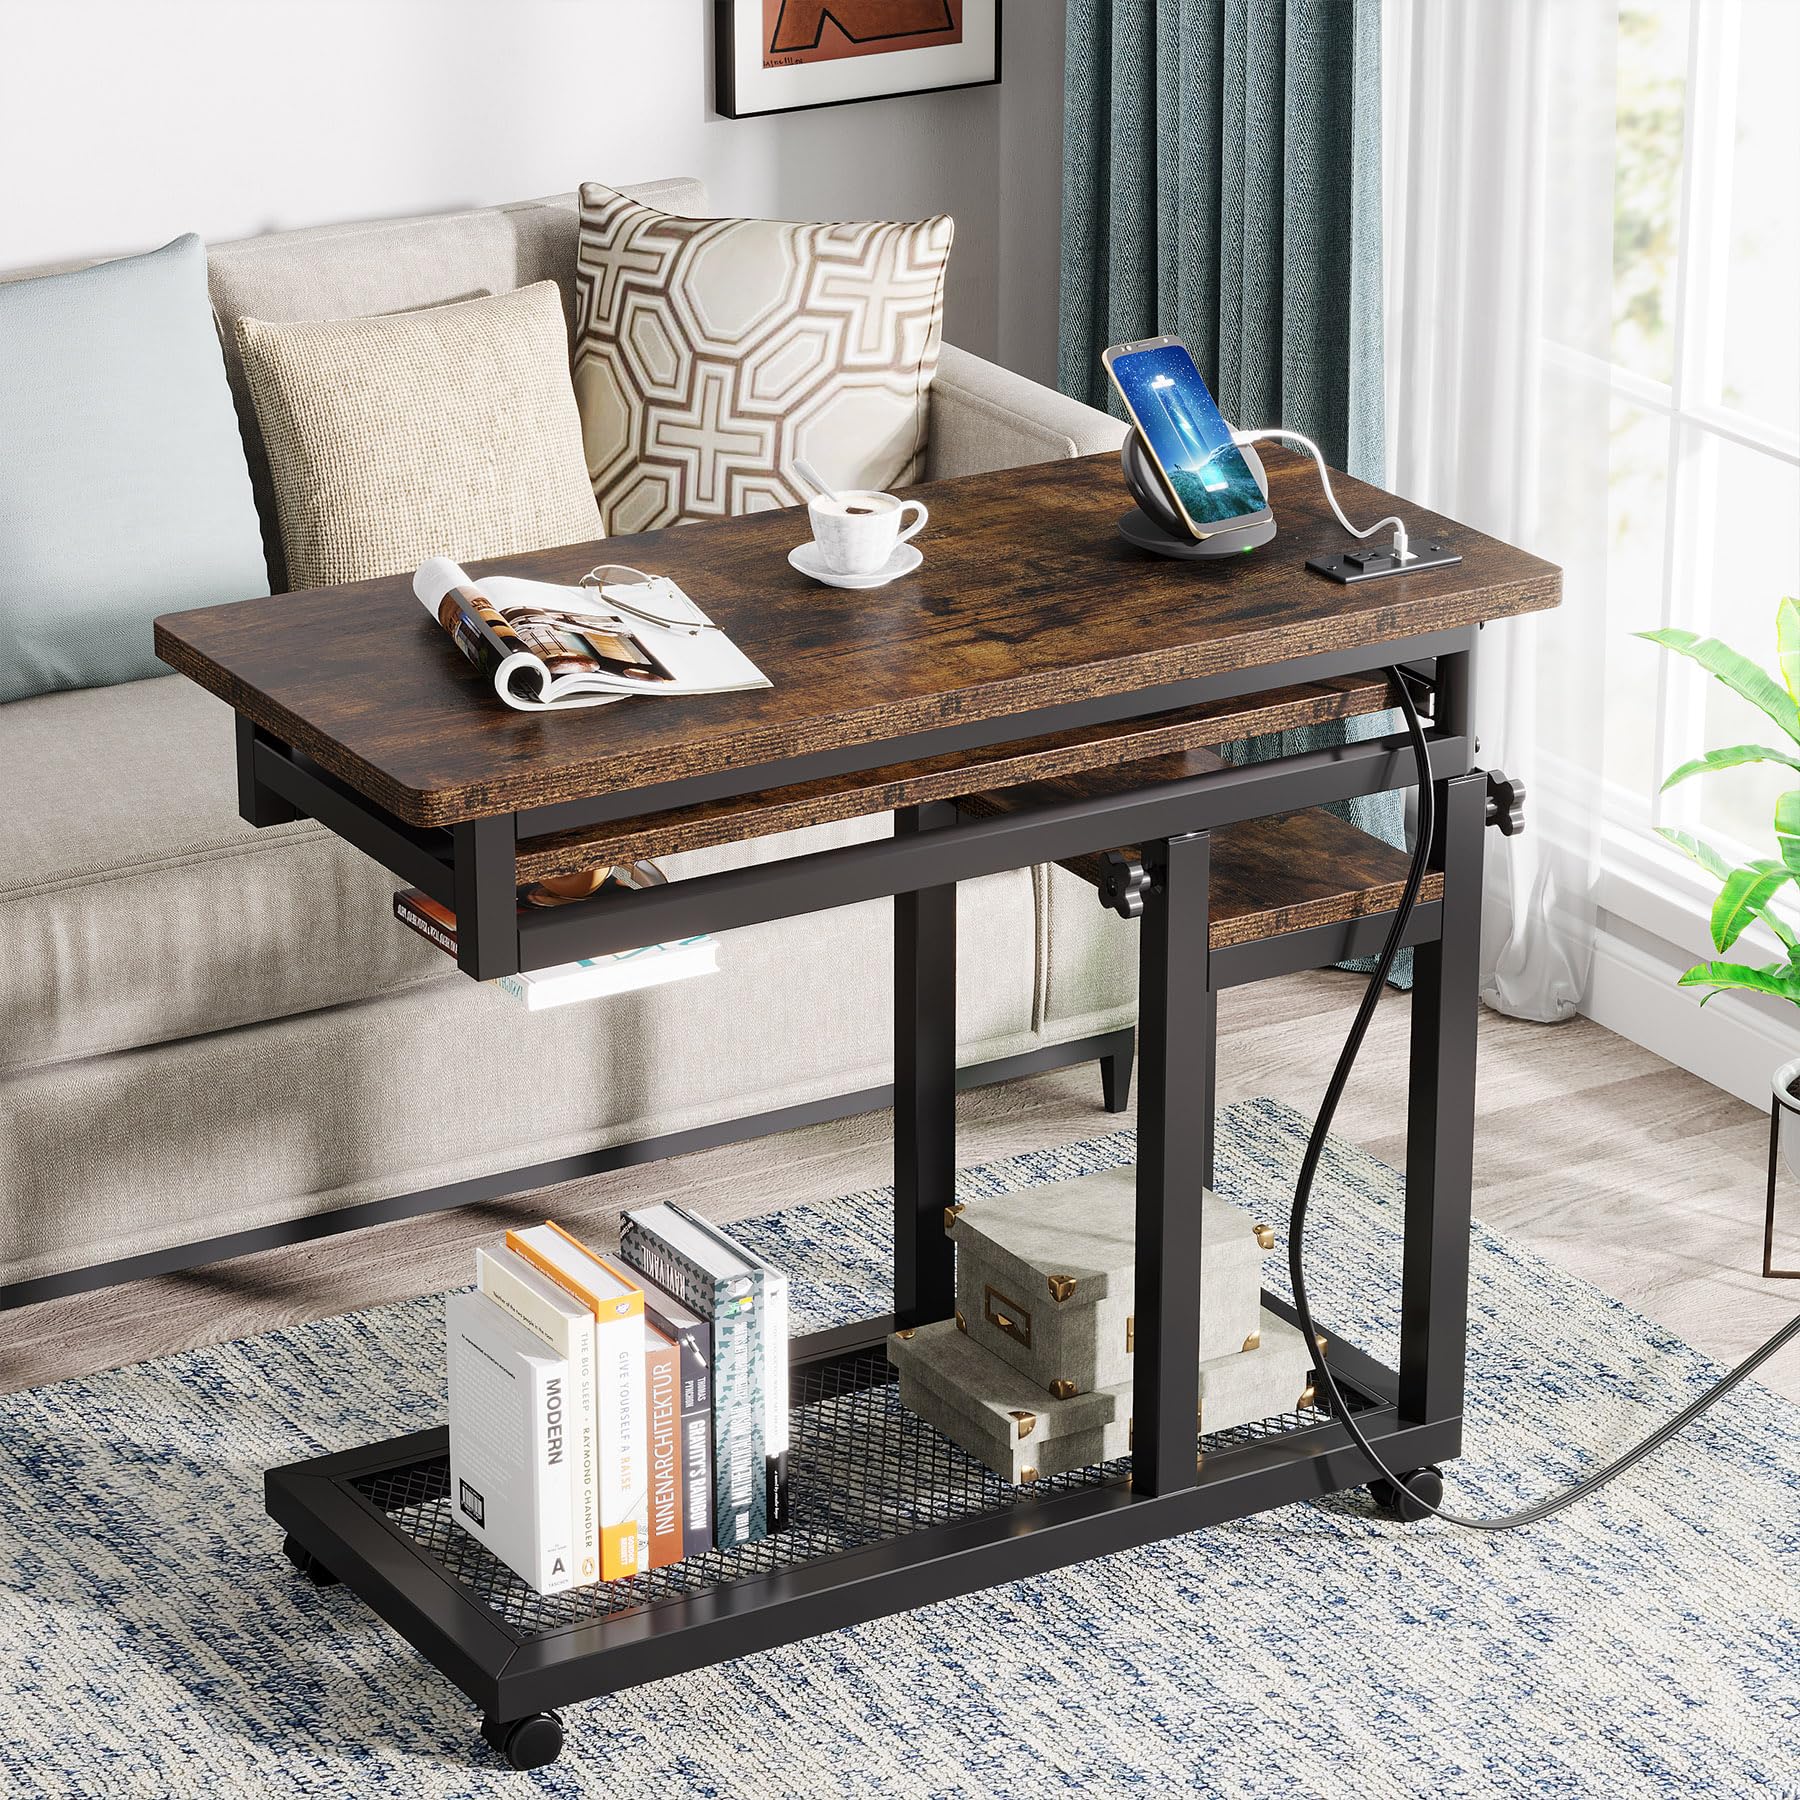 LITTLE TREE Rolling C Side Table Portable Desk with Power Outlet, Small, Brown